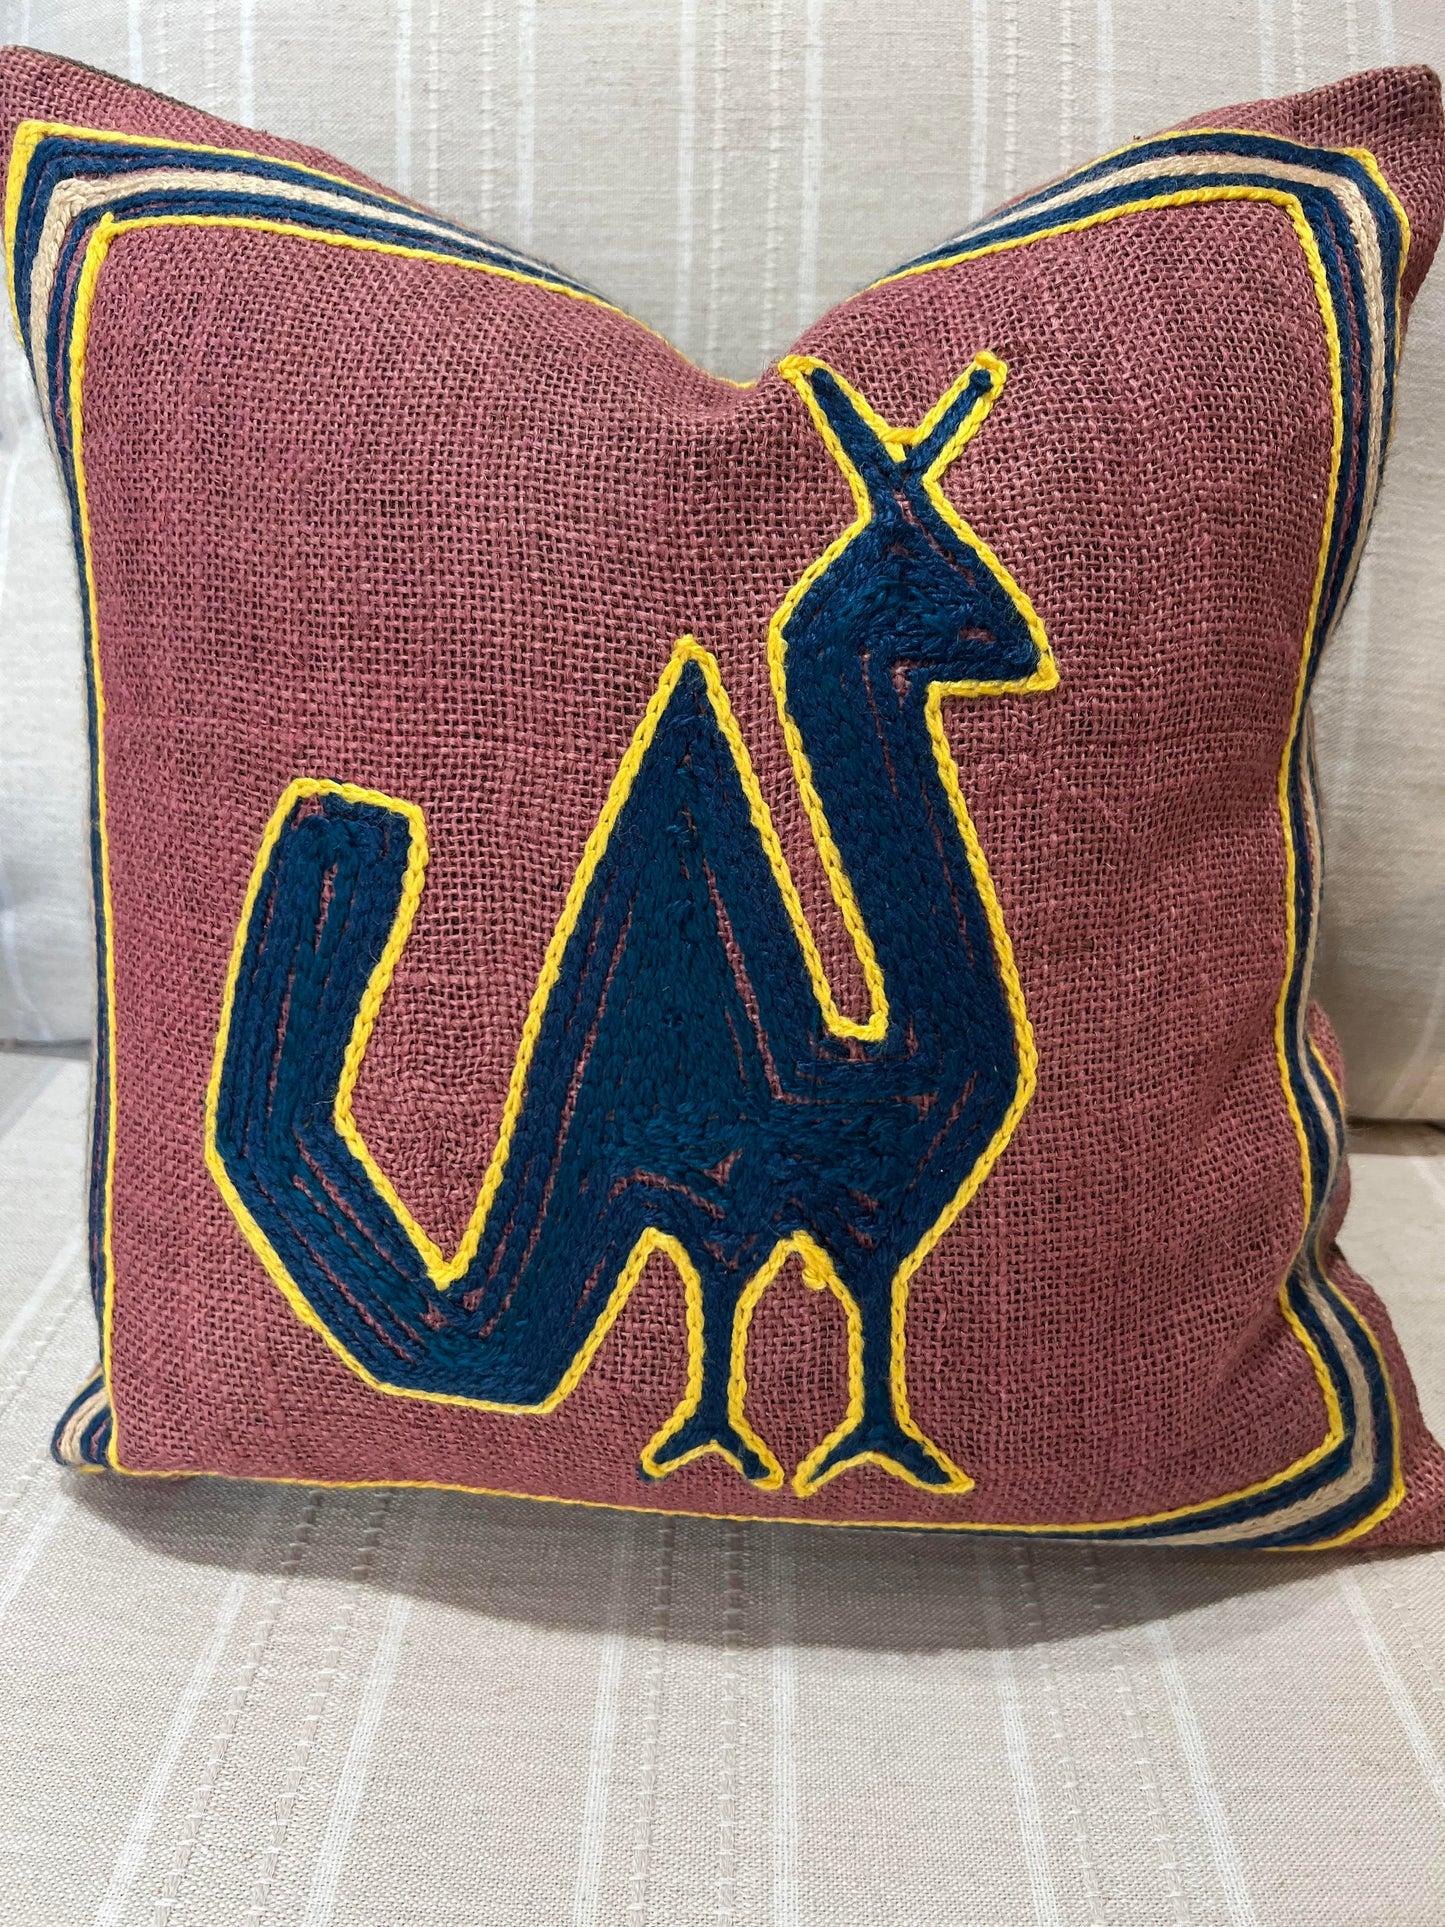 Hand Stitched Novelty Pillow